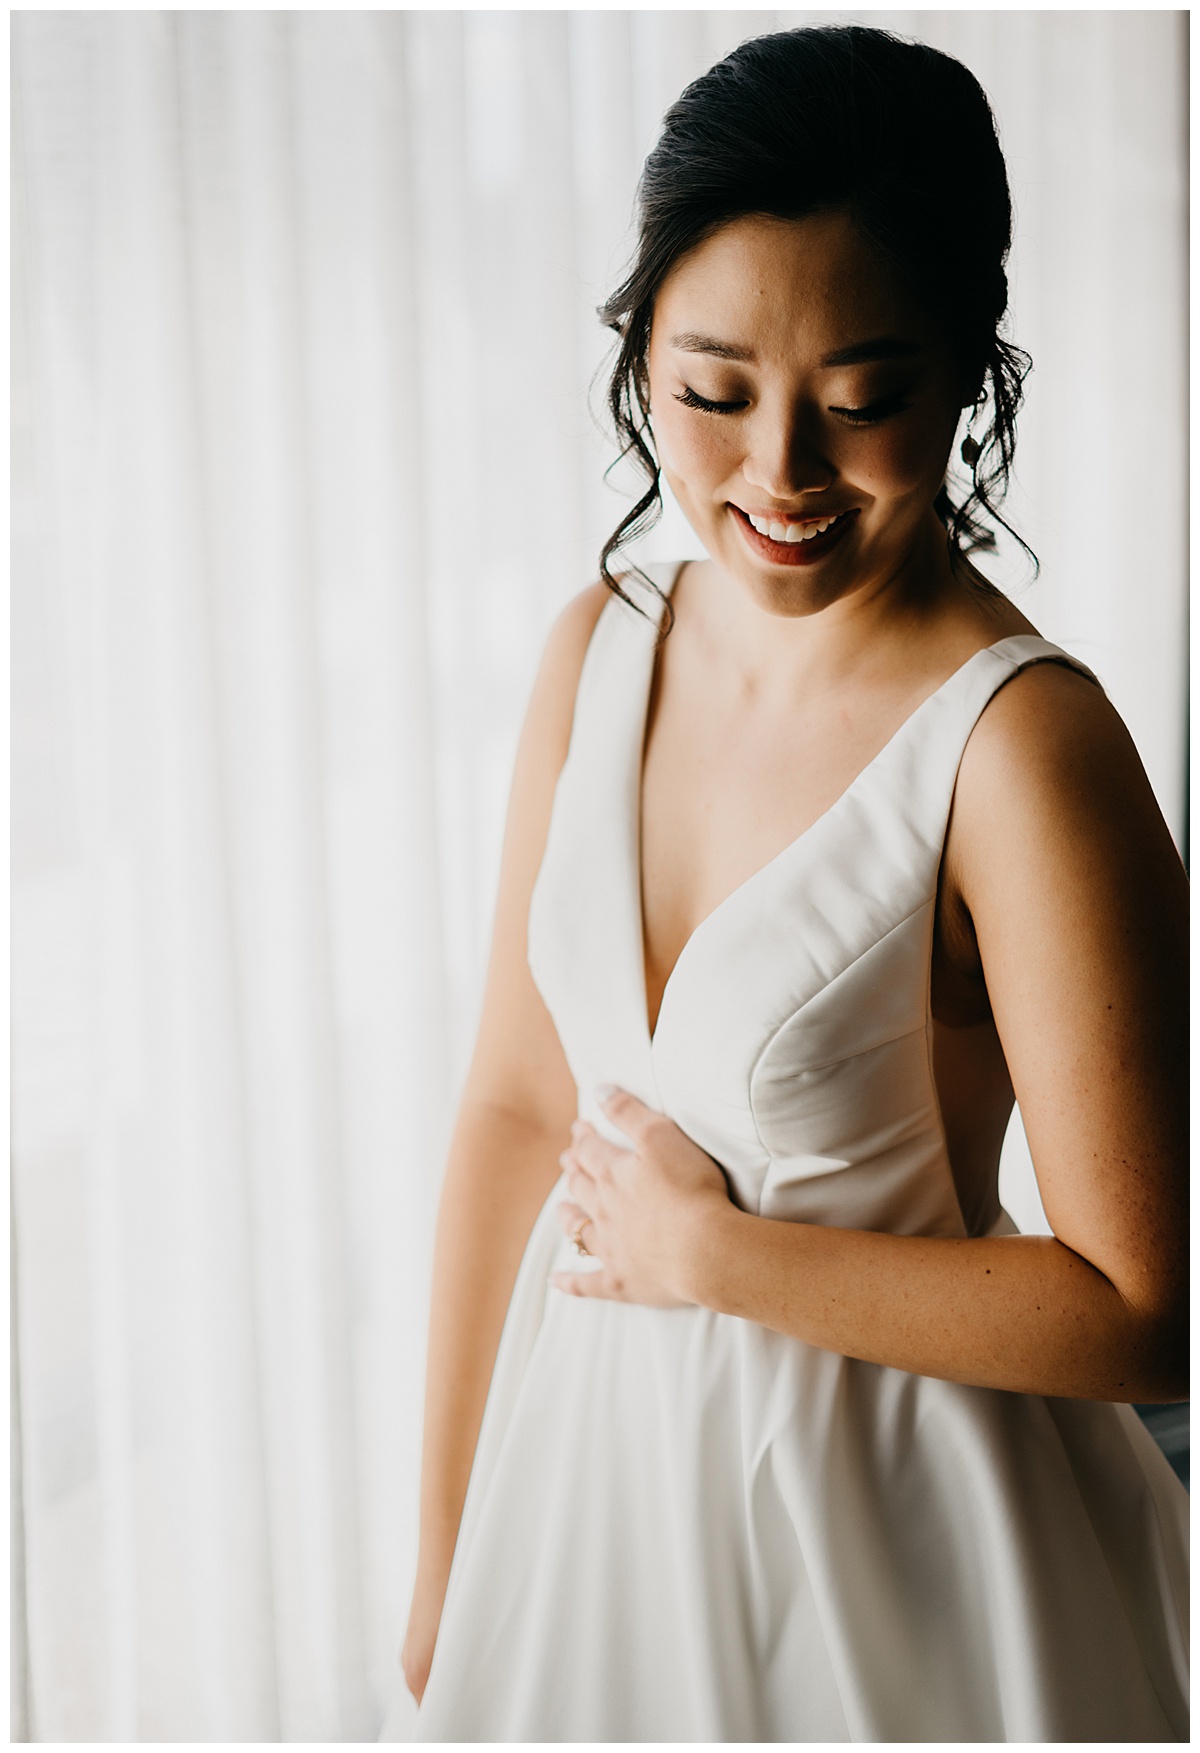 Minji & Chripstopher’s University of Michigan Museum of Art Wedding was full of not only detail but also a lot of patience as their original date was affected by COVID.